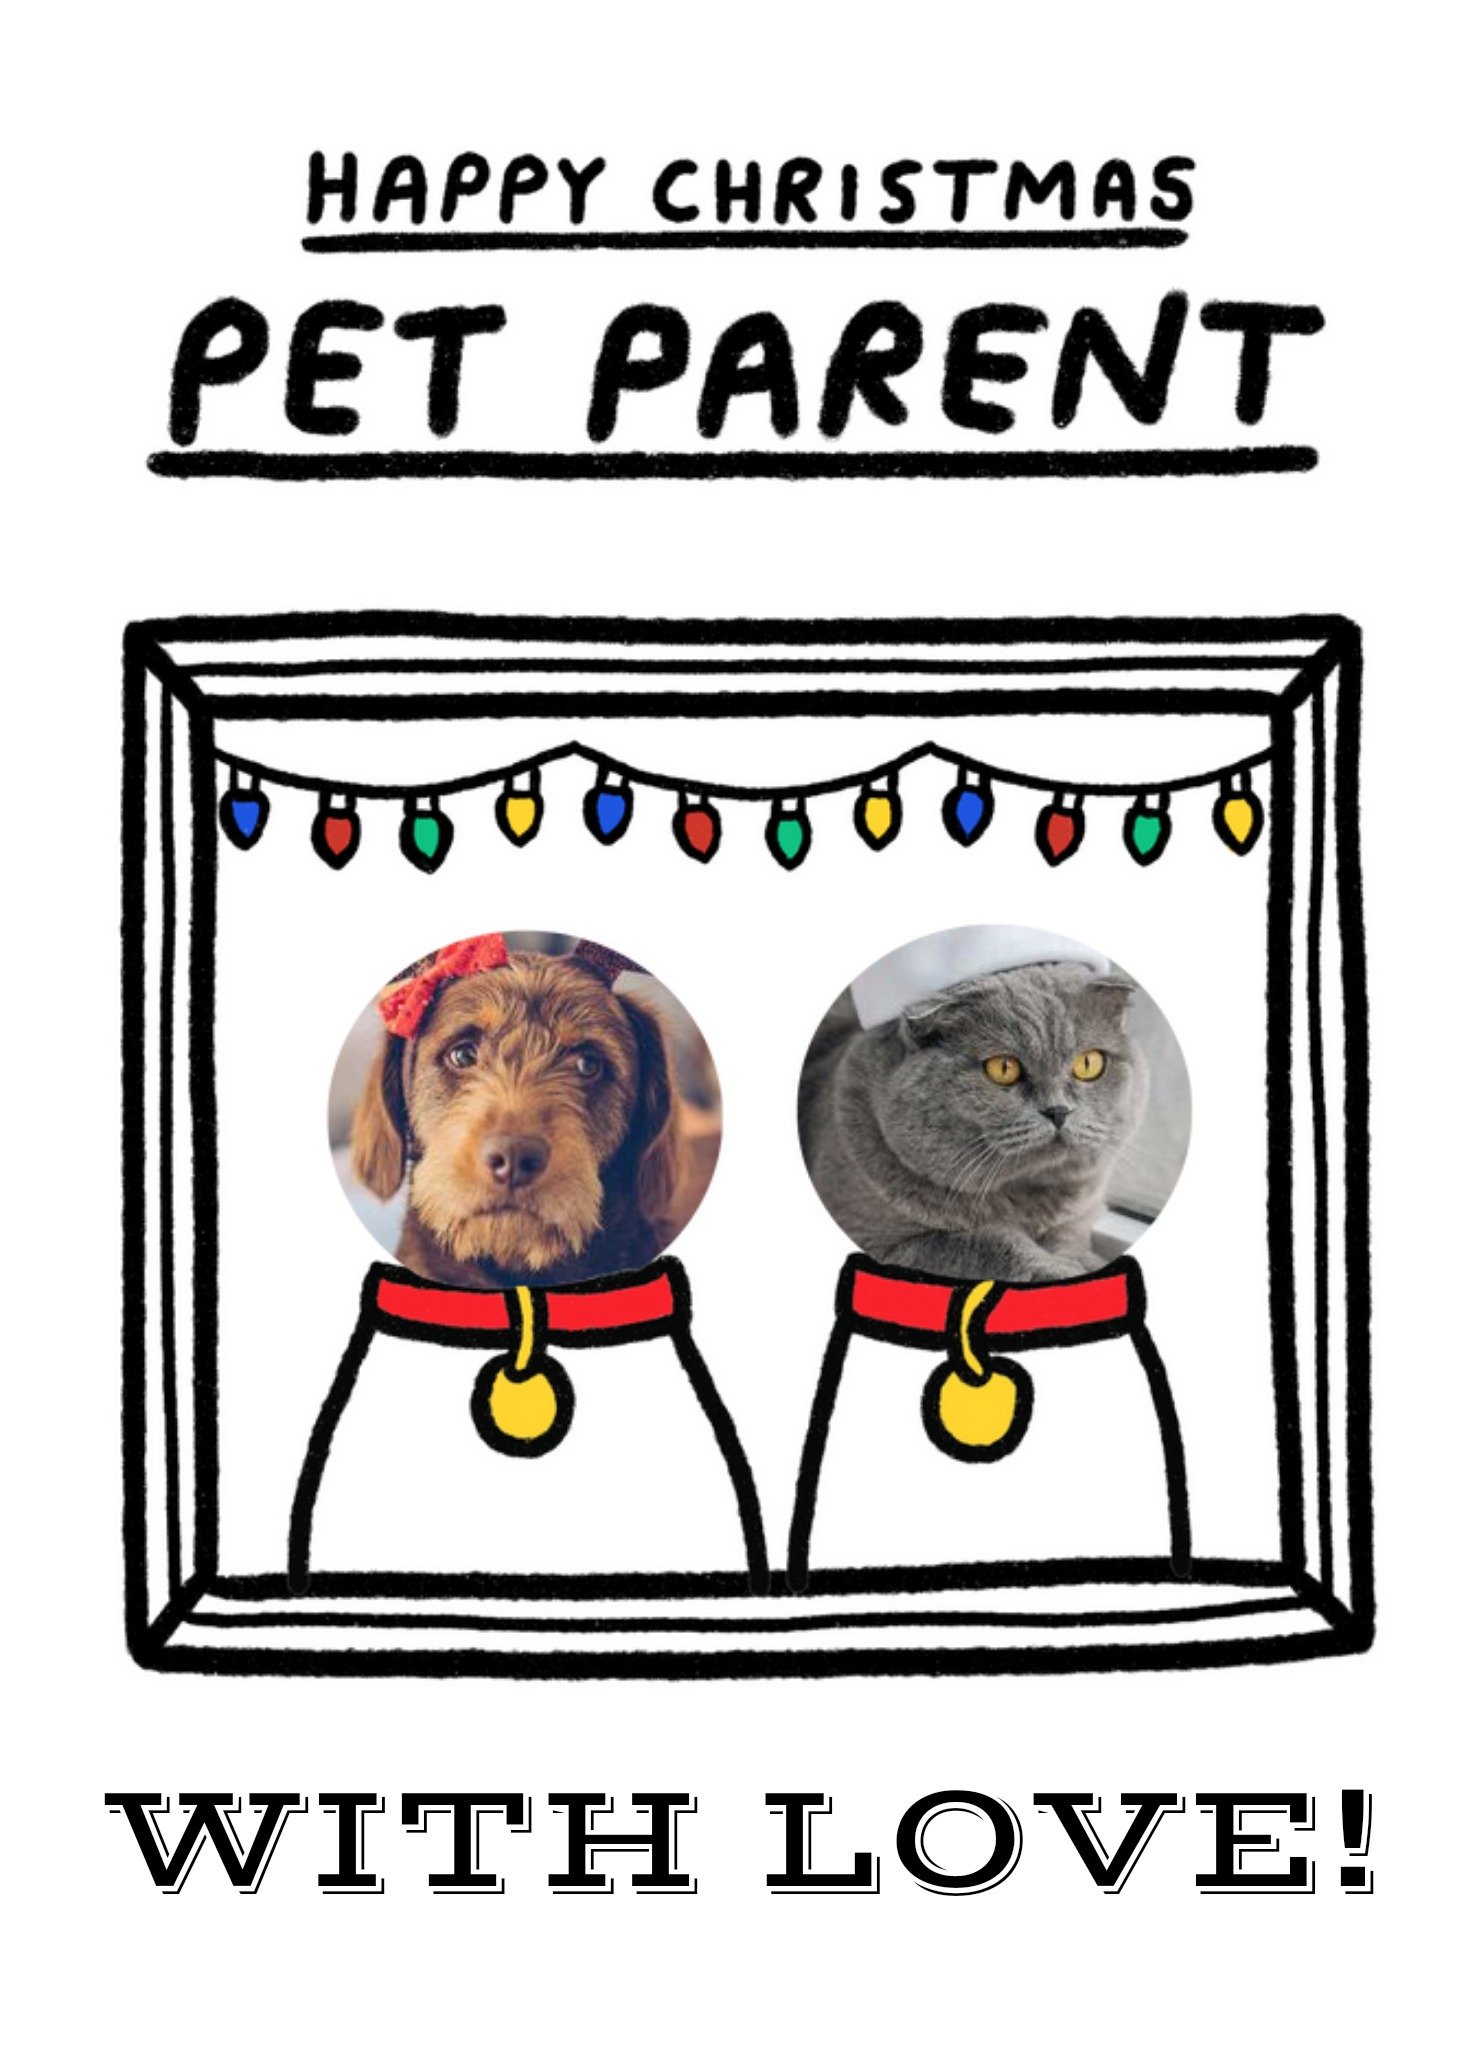 Moonpig Illustration Of Pets In A Picture Frame Pet Parent Photo Upload Christmas Card Ecard